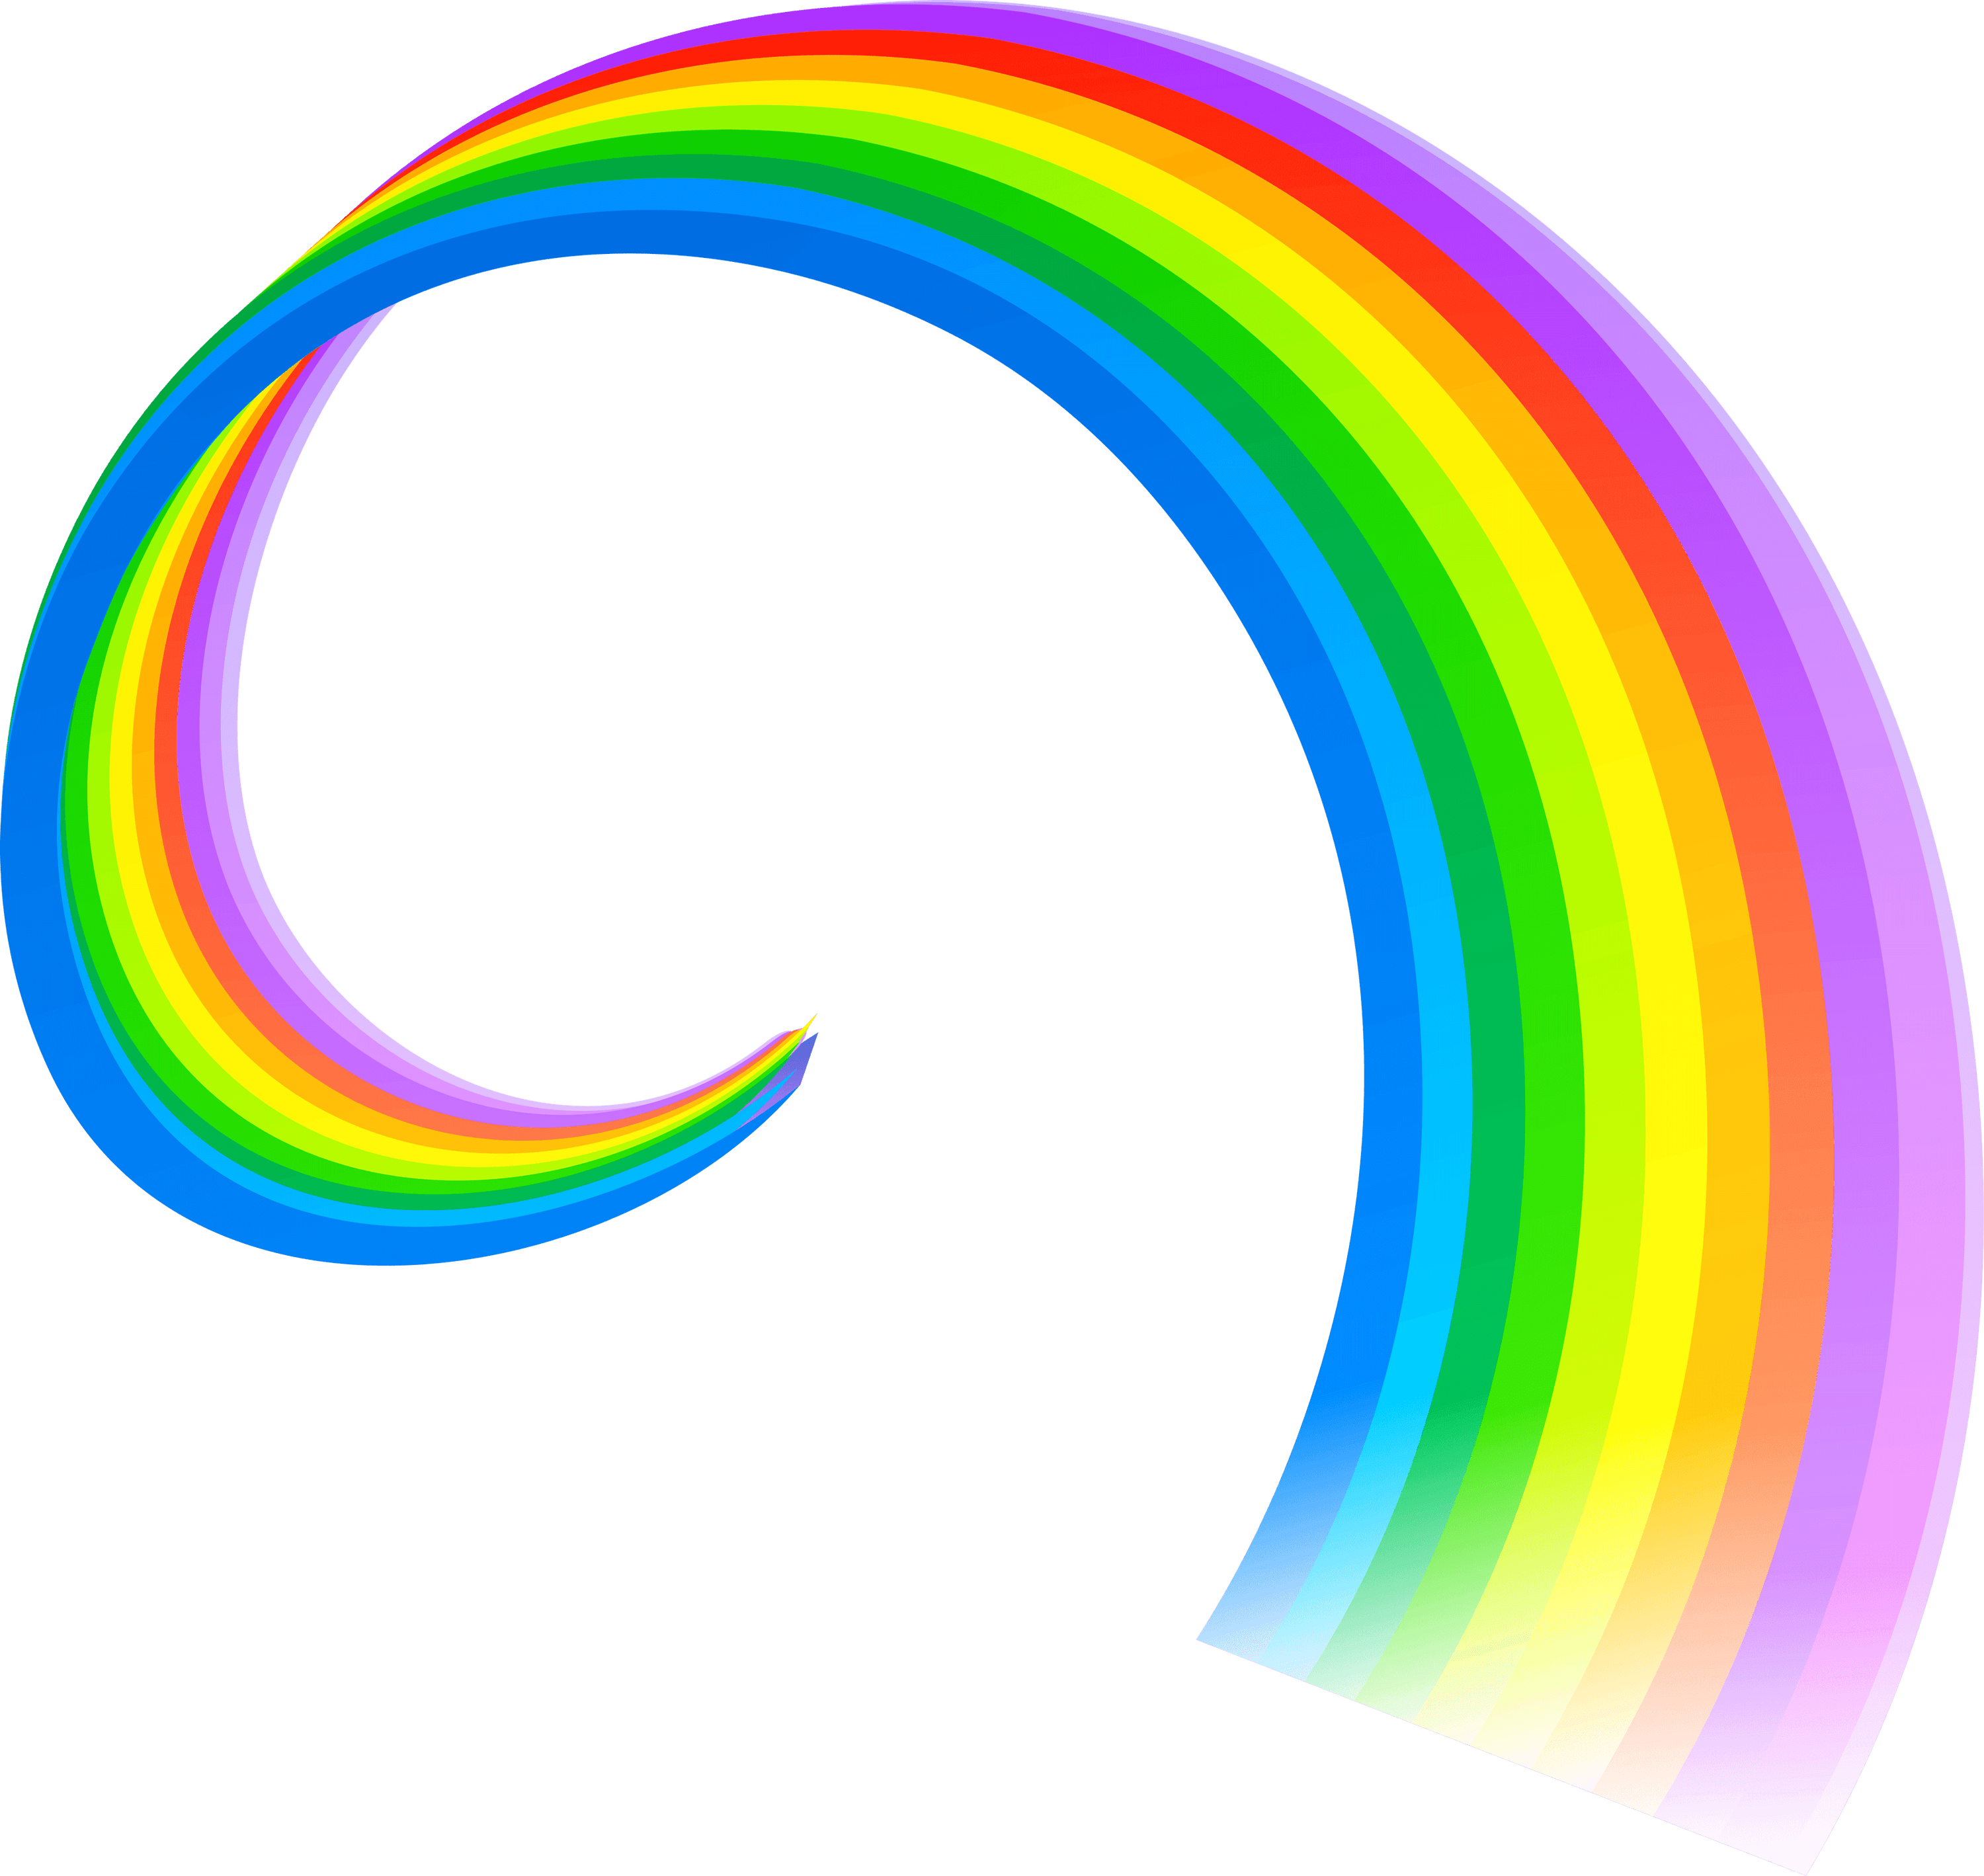 Spiral Rainbow PNG images